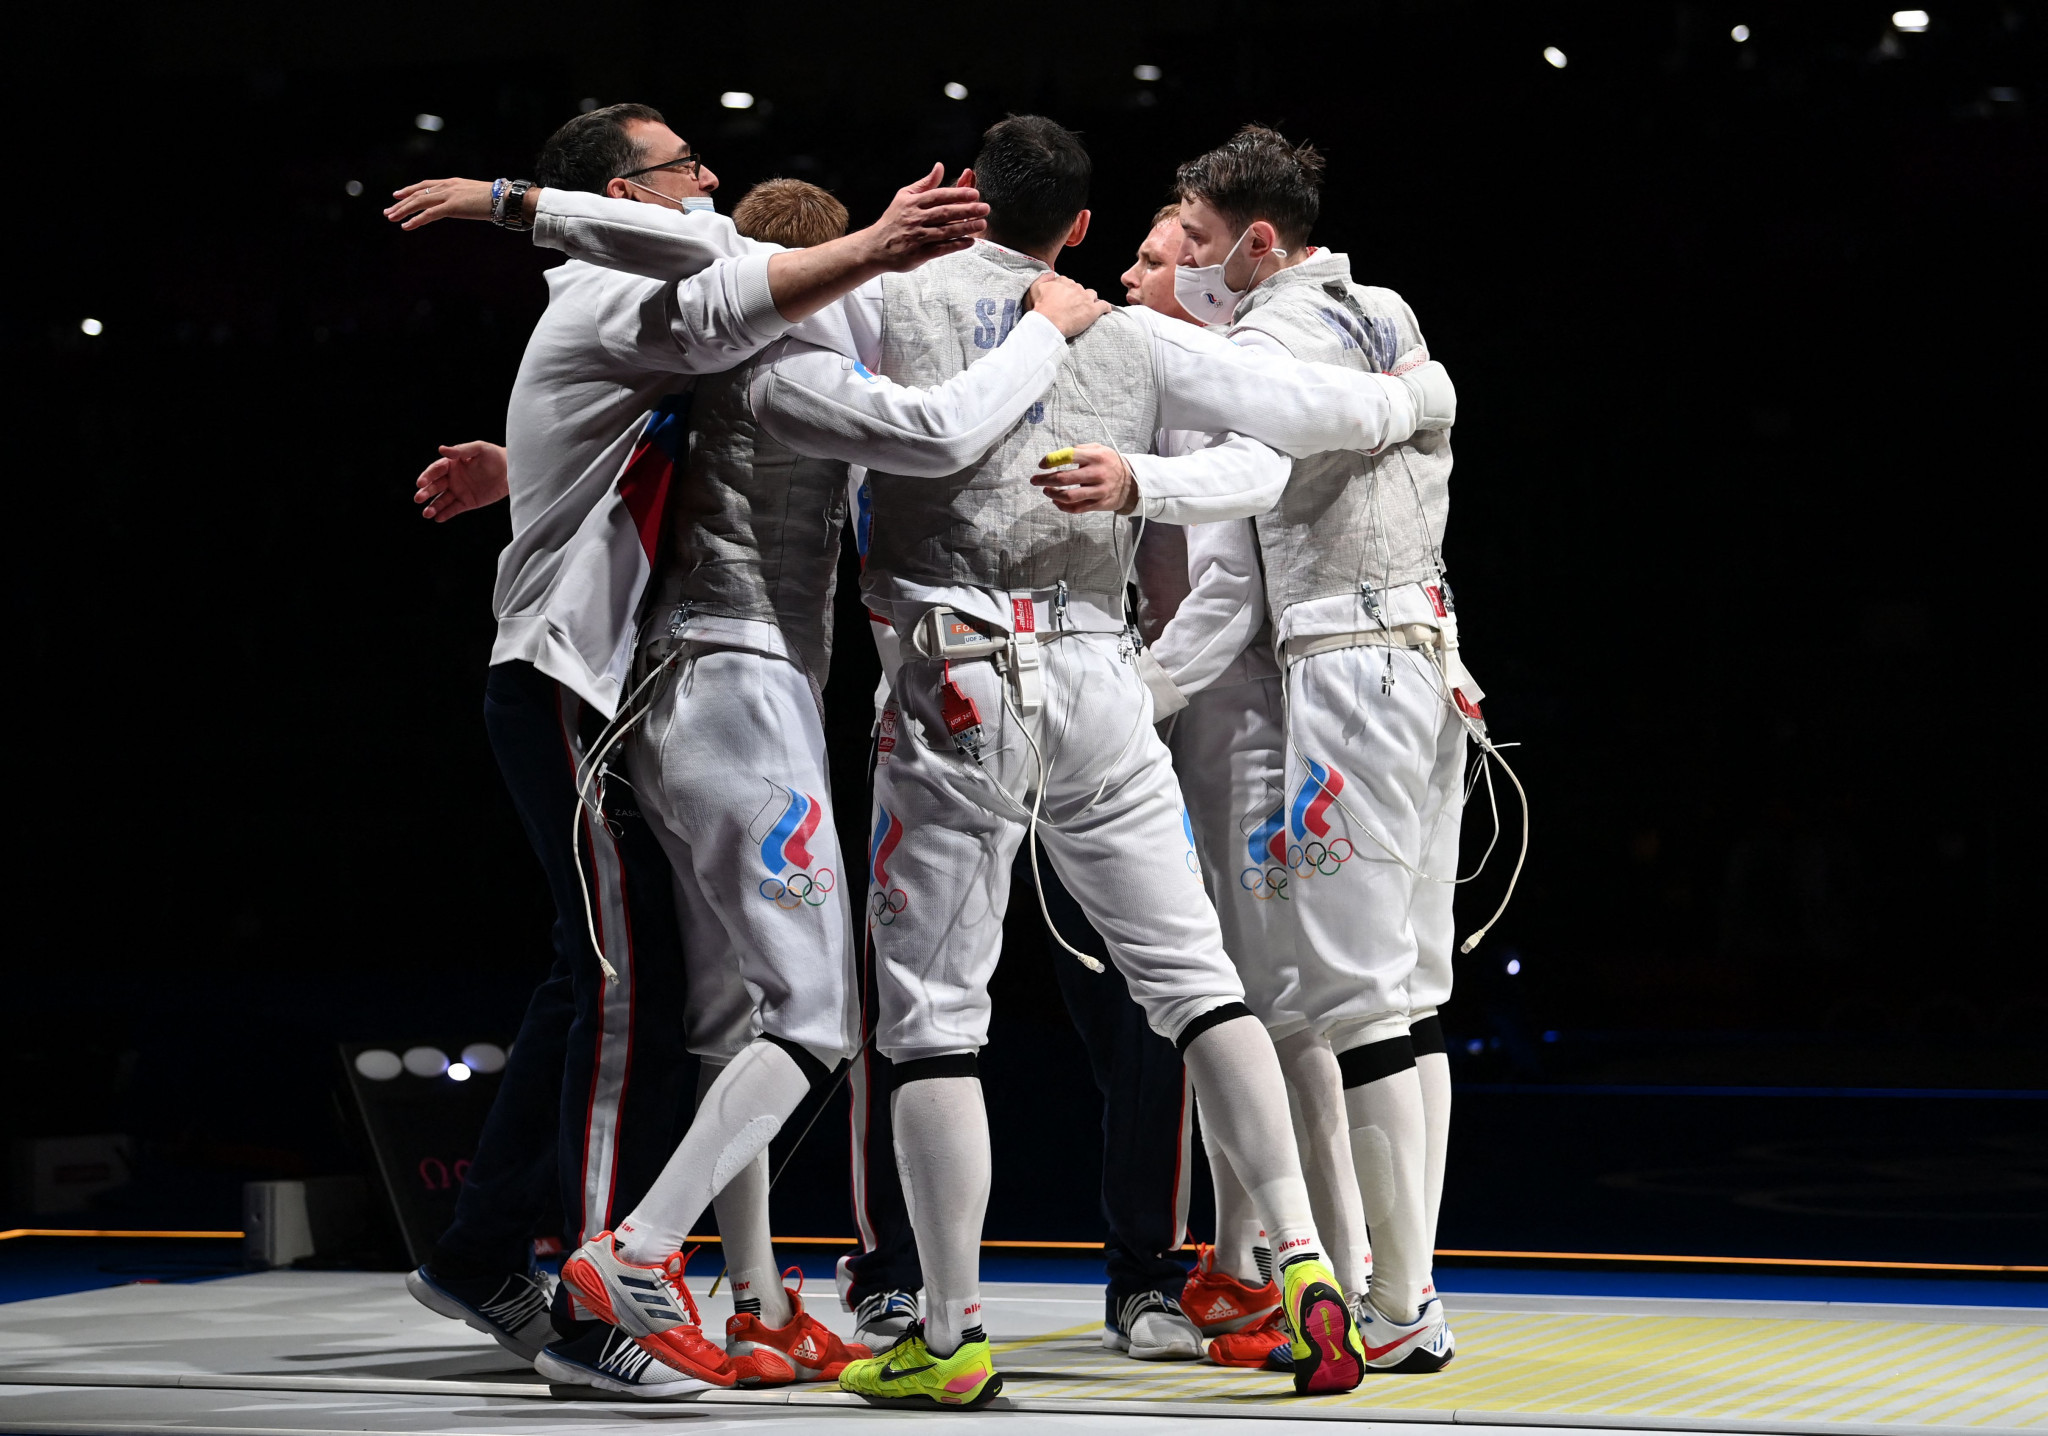 Russian fencers are banned from competing at next month's World Fencing Championships in Cairo ©Getty Images